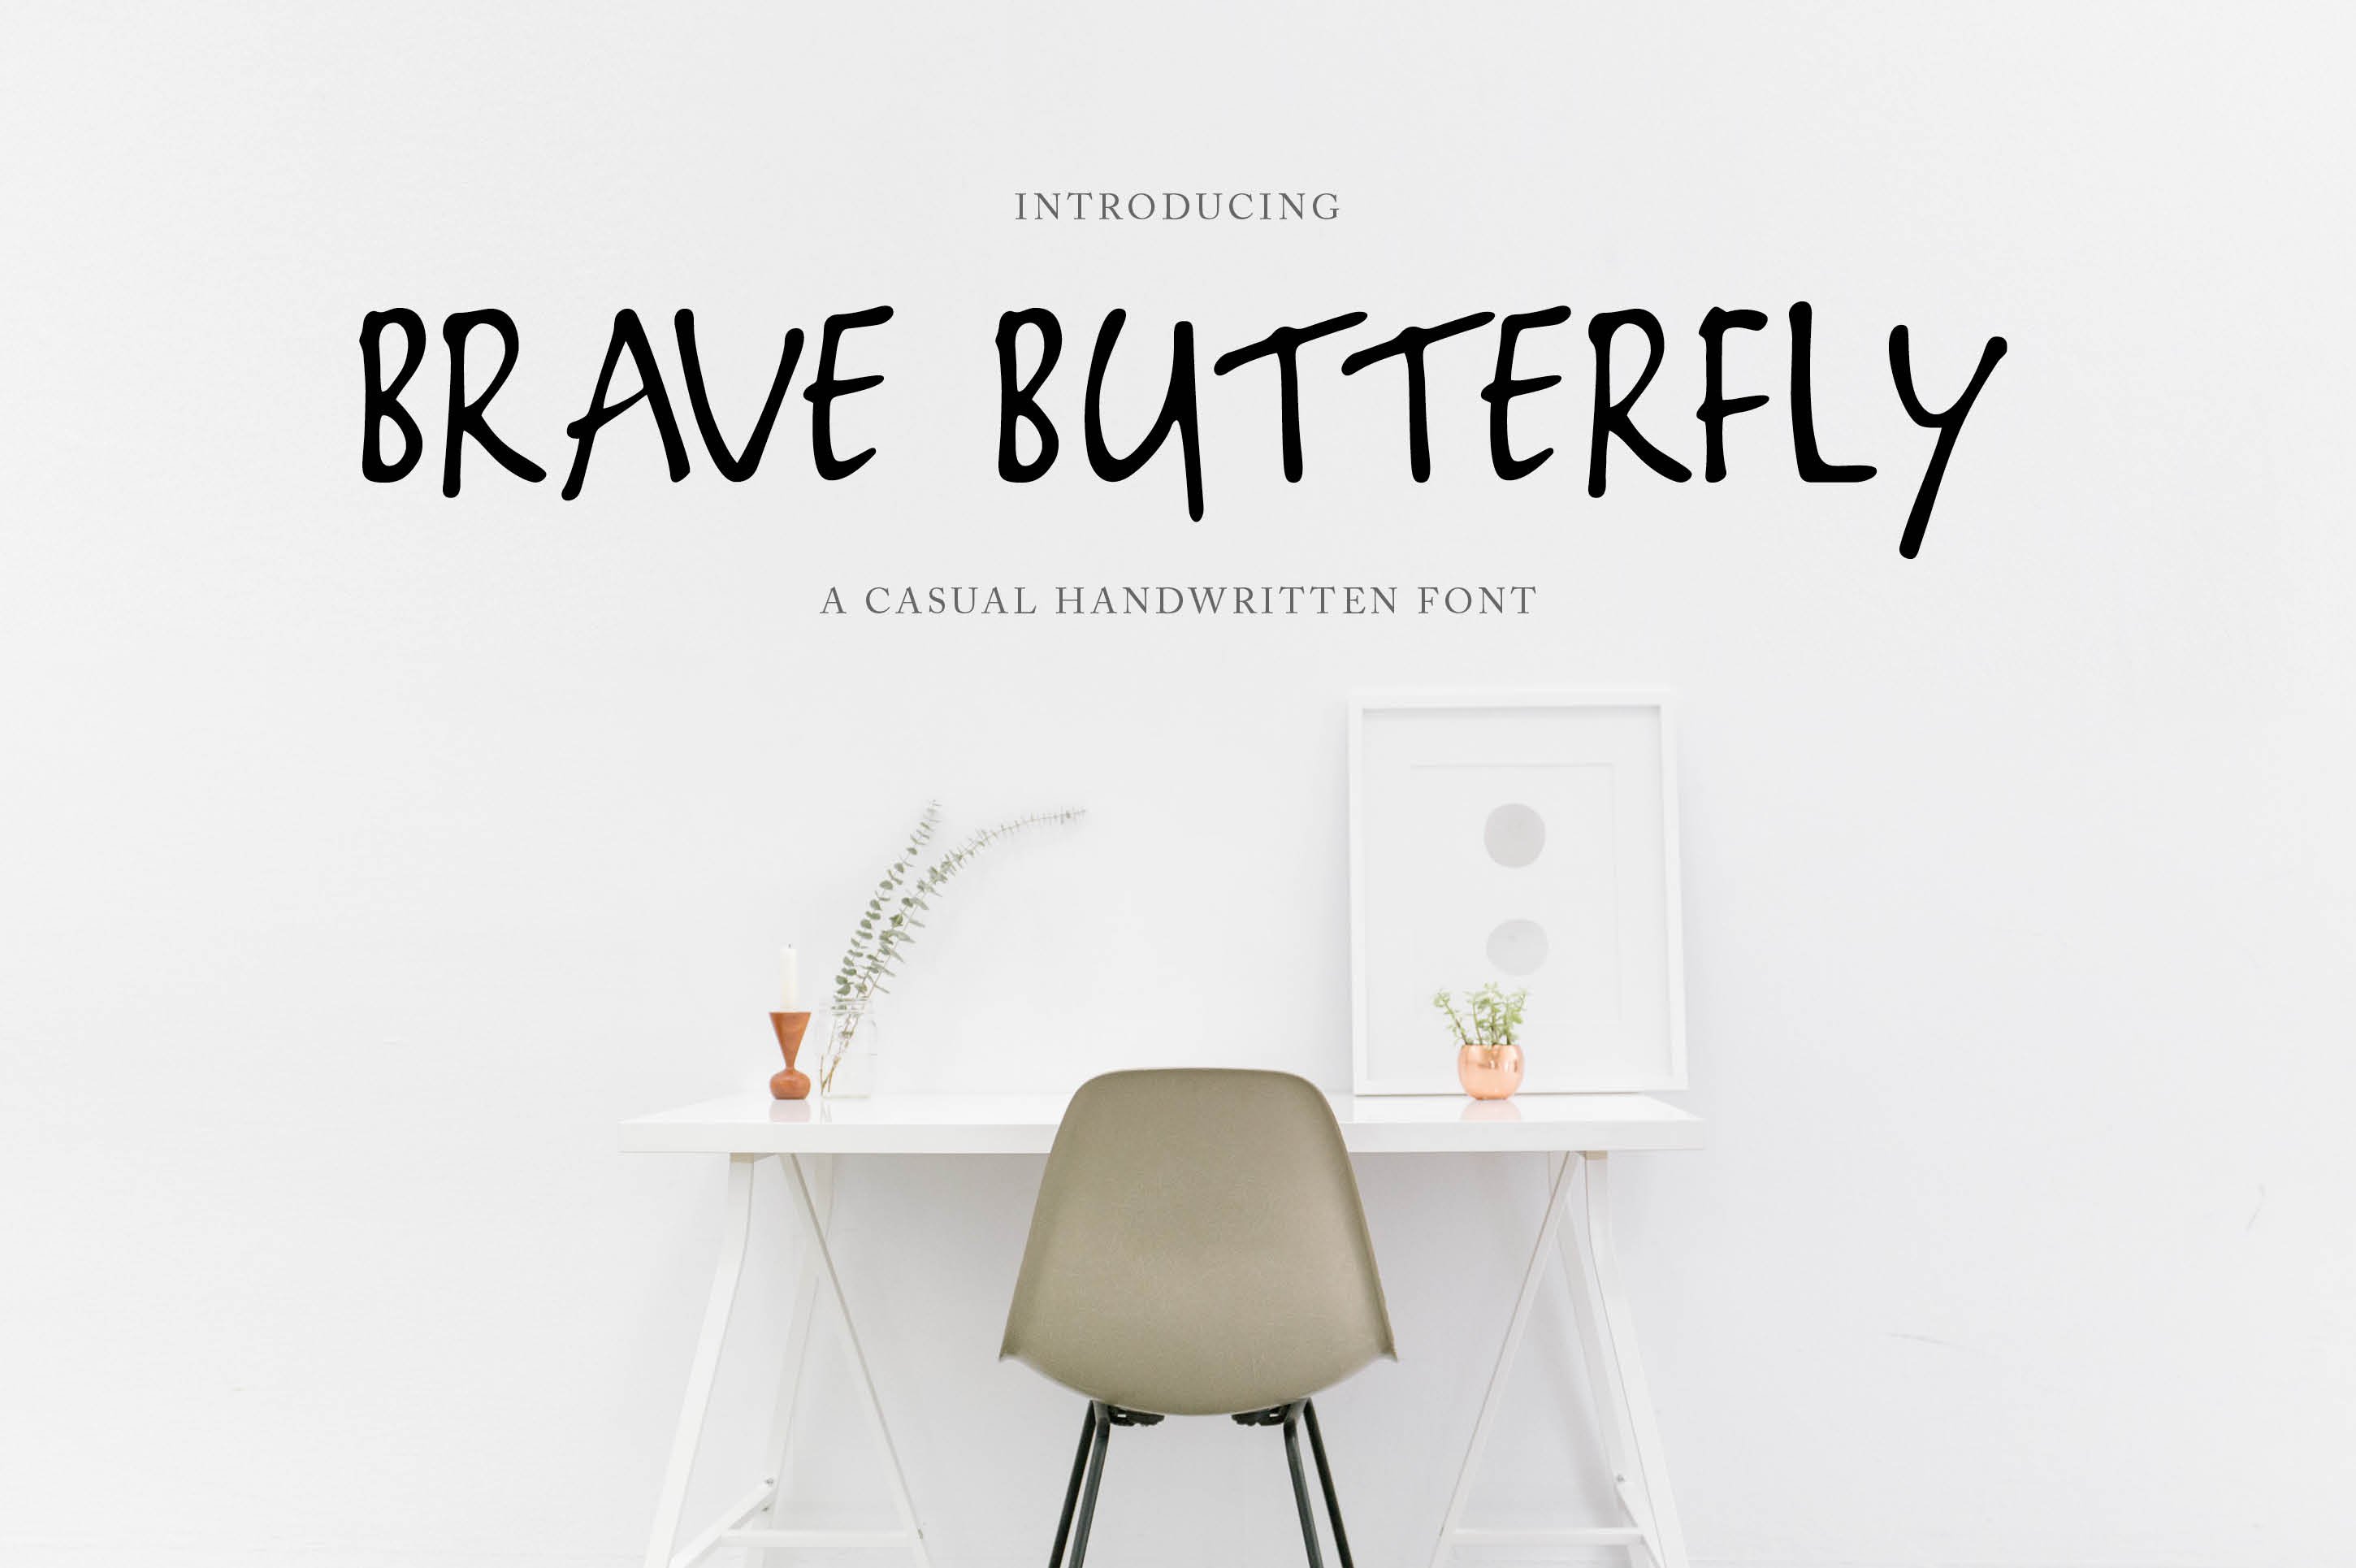 Brave Butterfly cover image.